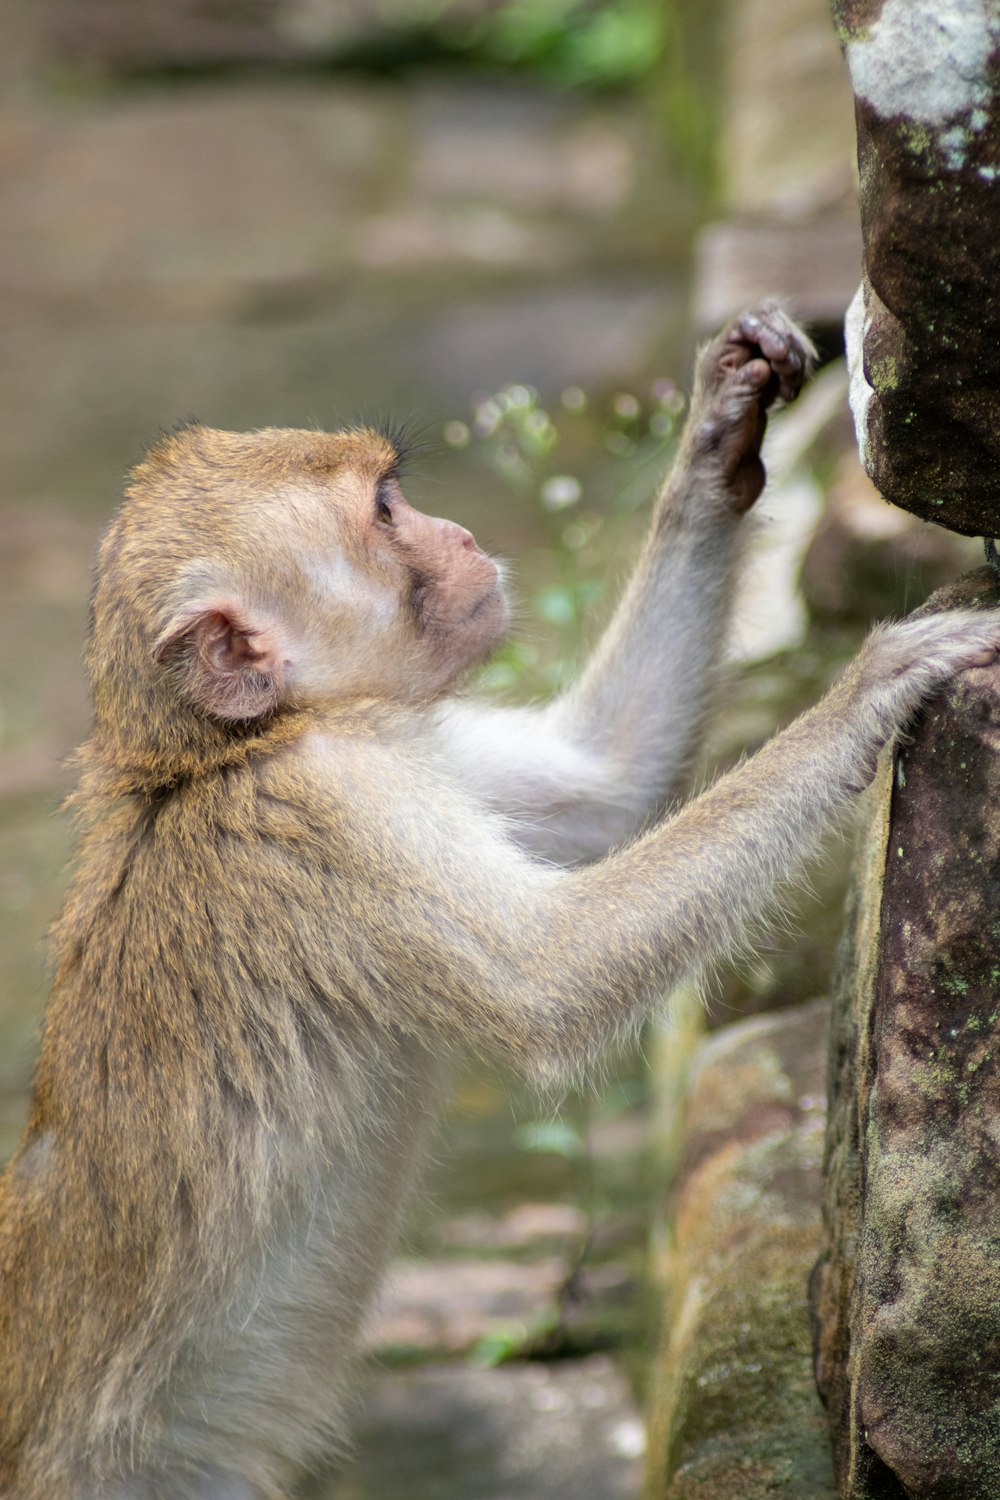 a monkey is reaching up to a rock